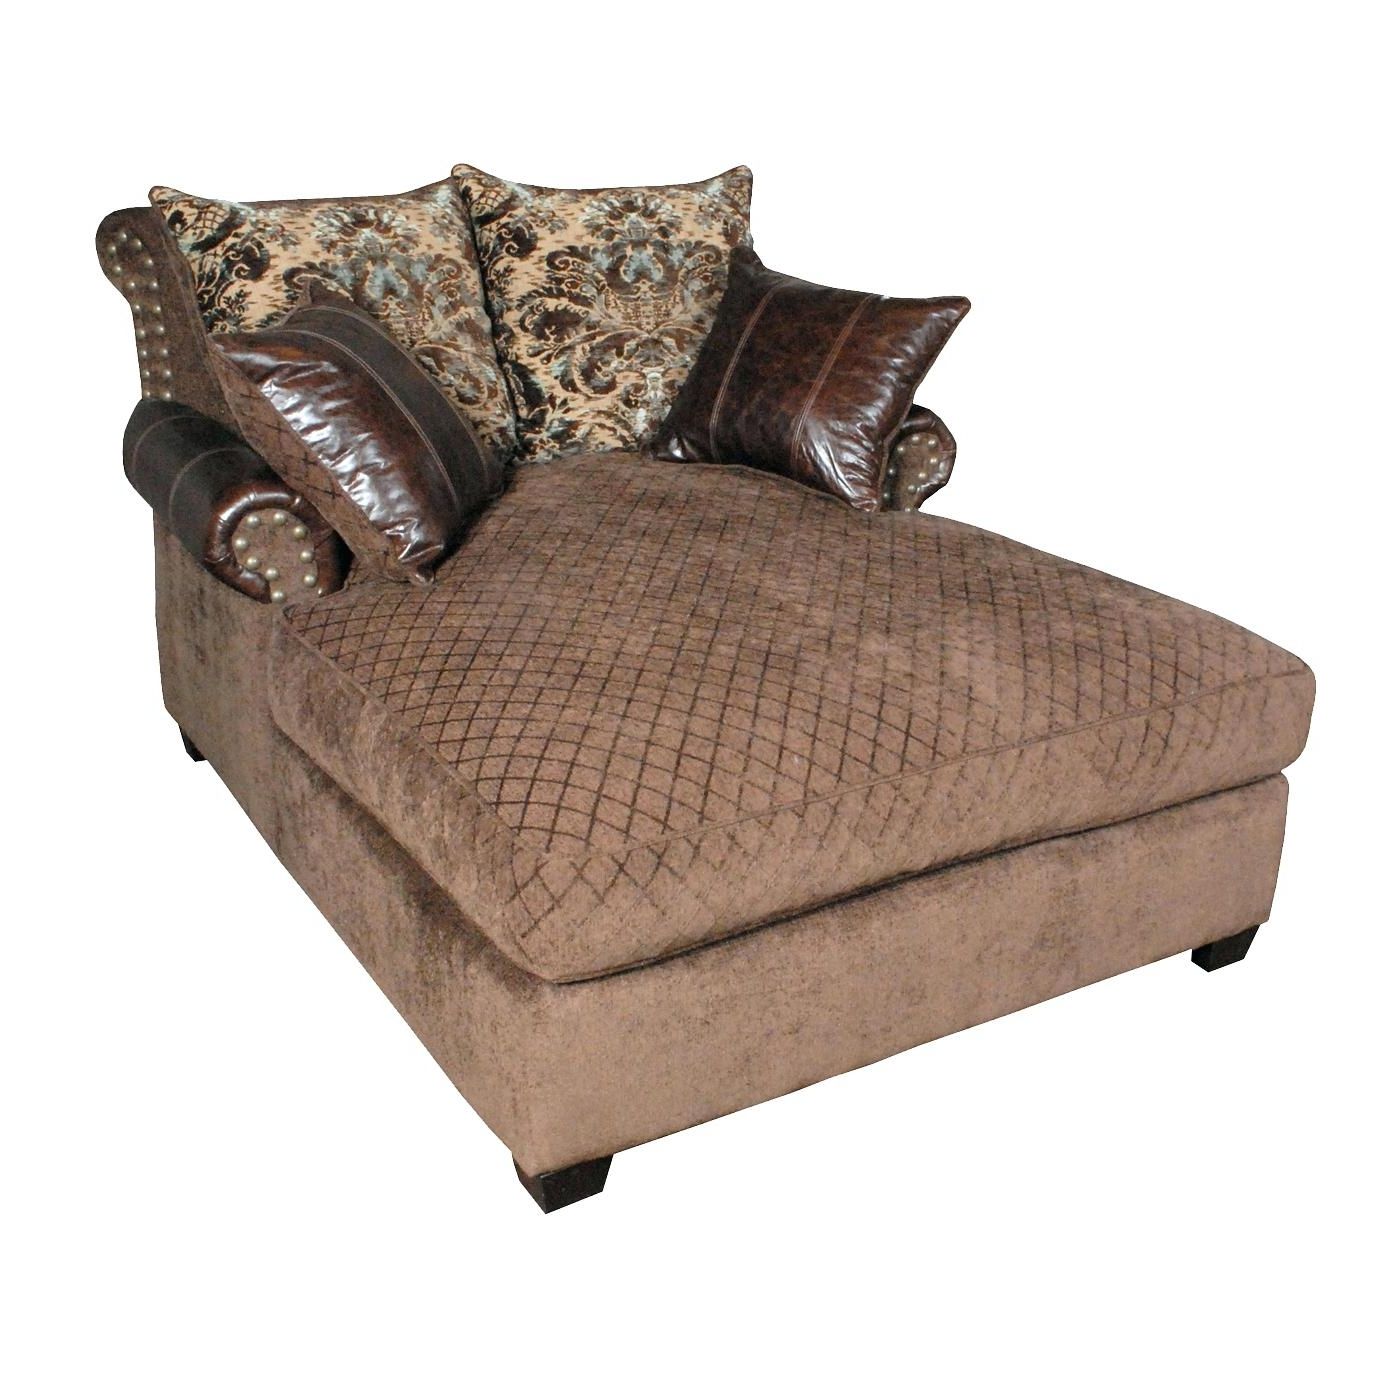 Double Chaise Lounges With Regard To Latest Double Chaise Lounge Chair Cover • Chair Covers Ideas (Photo 13 of 15)